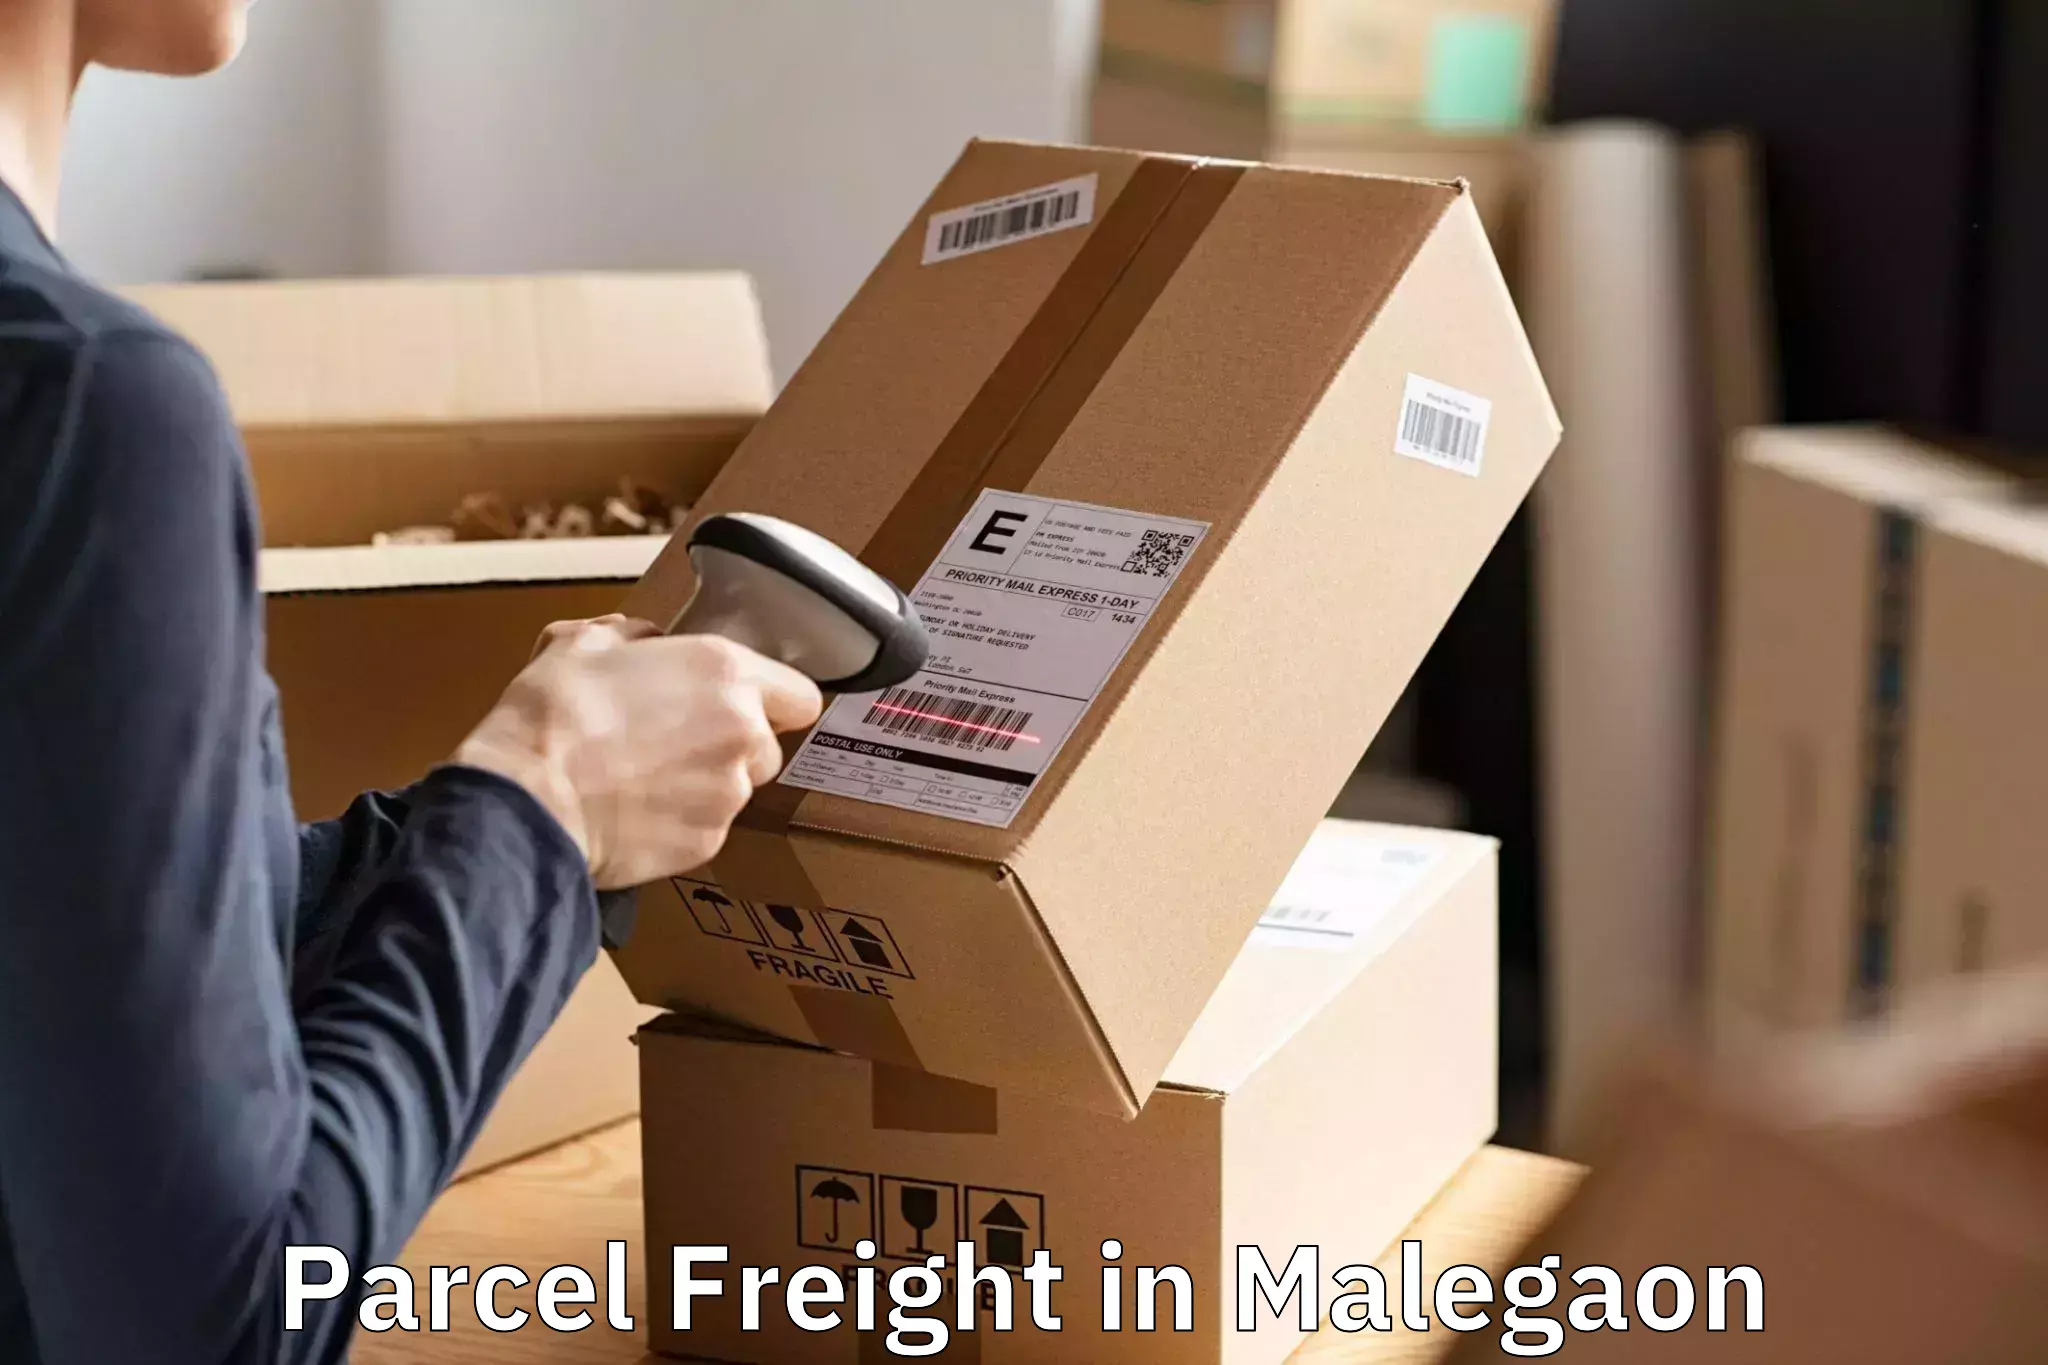 Easy Parcel Freight Booking in Malegaon, Maharashtra (MH)